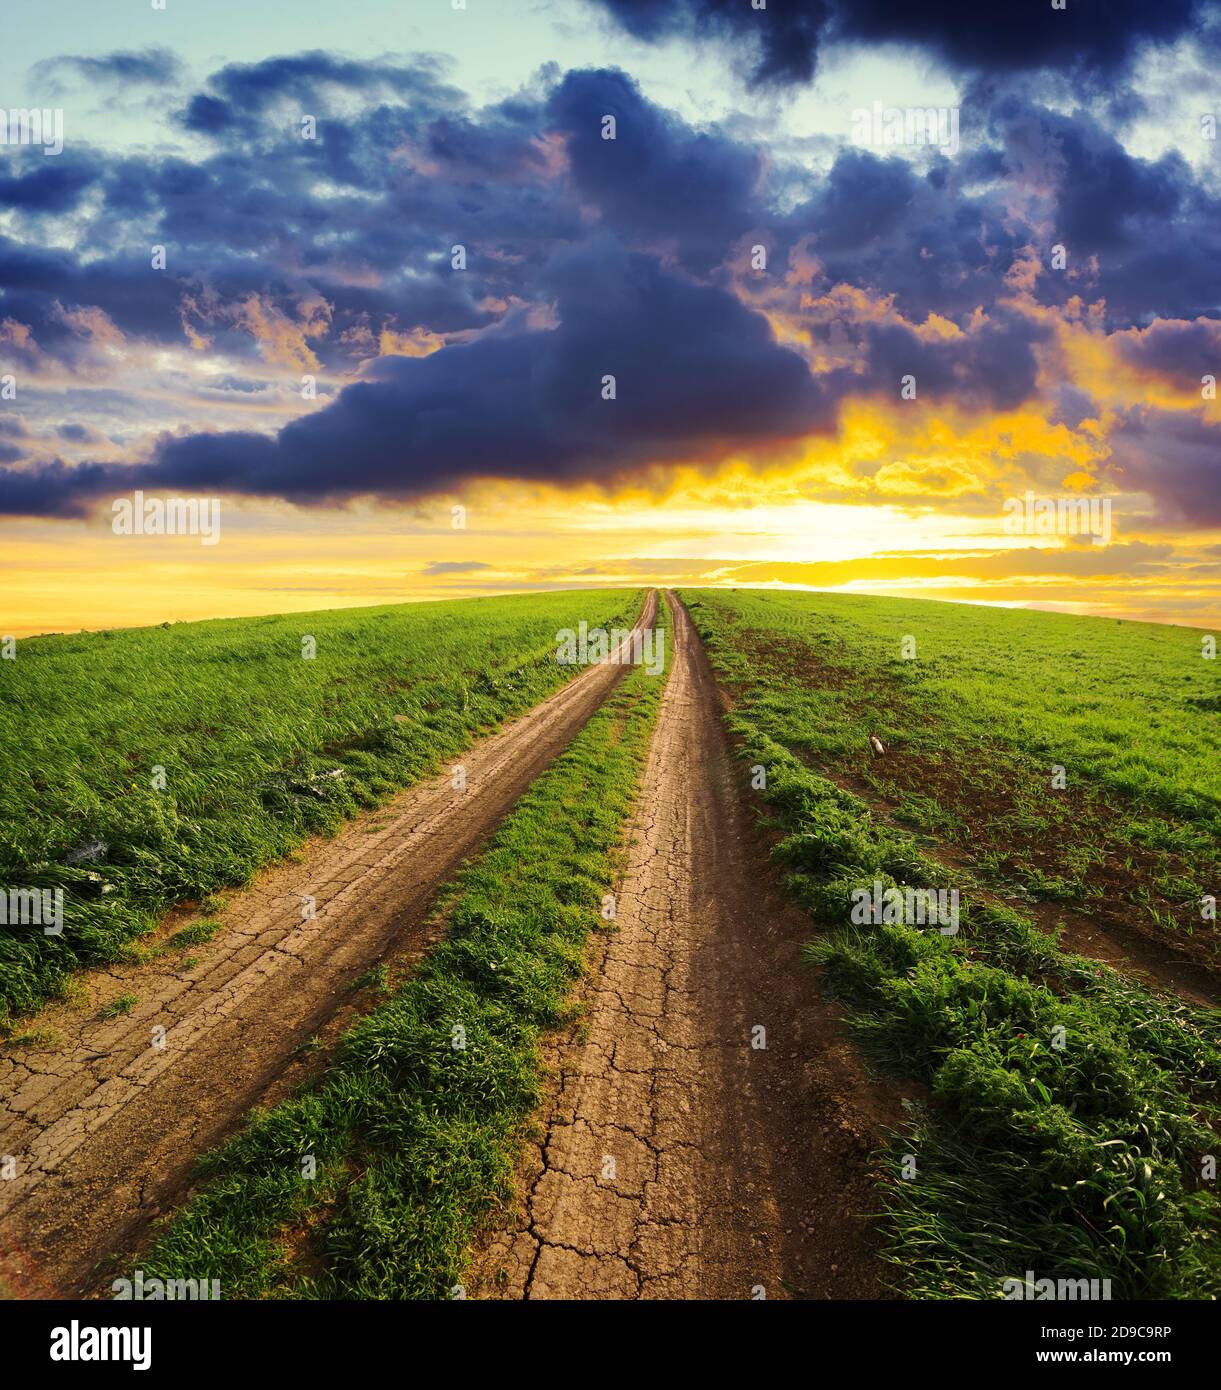 rural path uphill way to a dramatic sky at the sunset crossing a field of grass Stock Photo